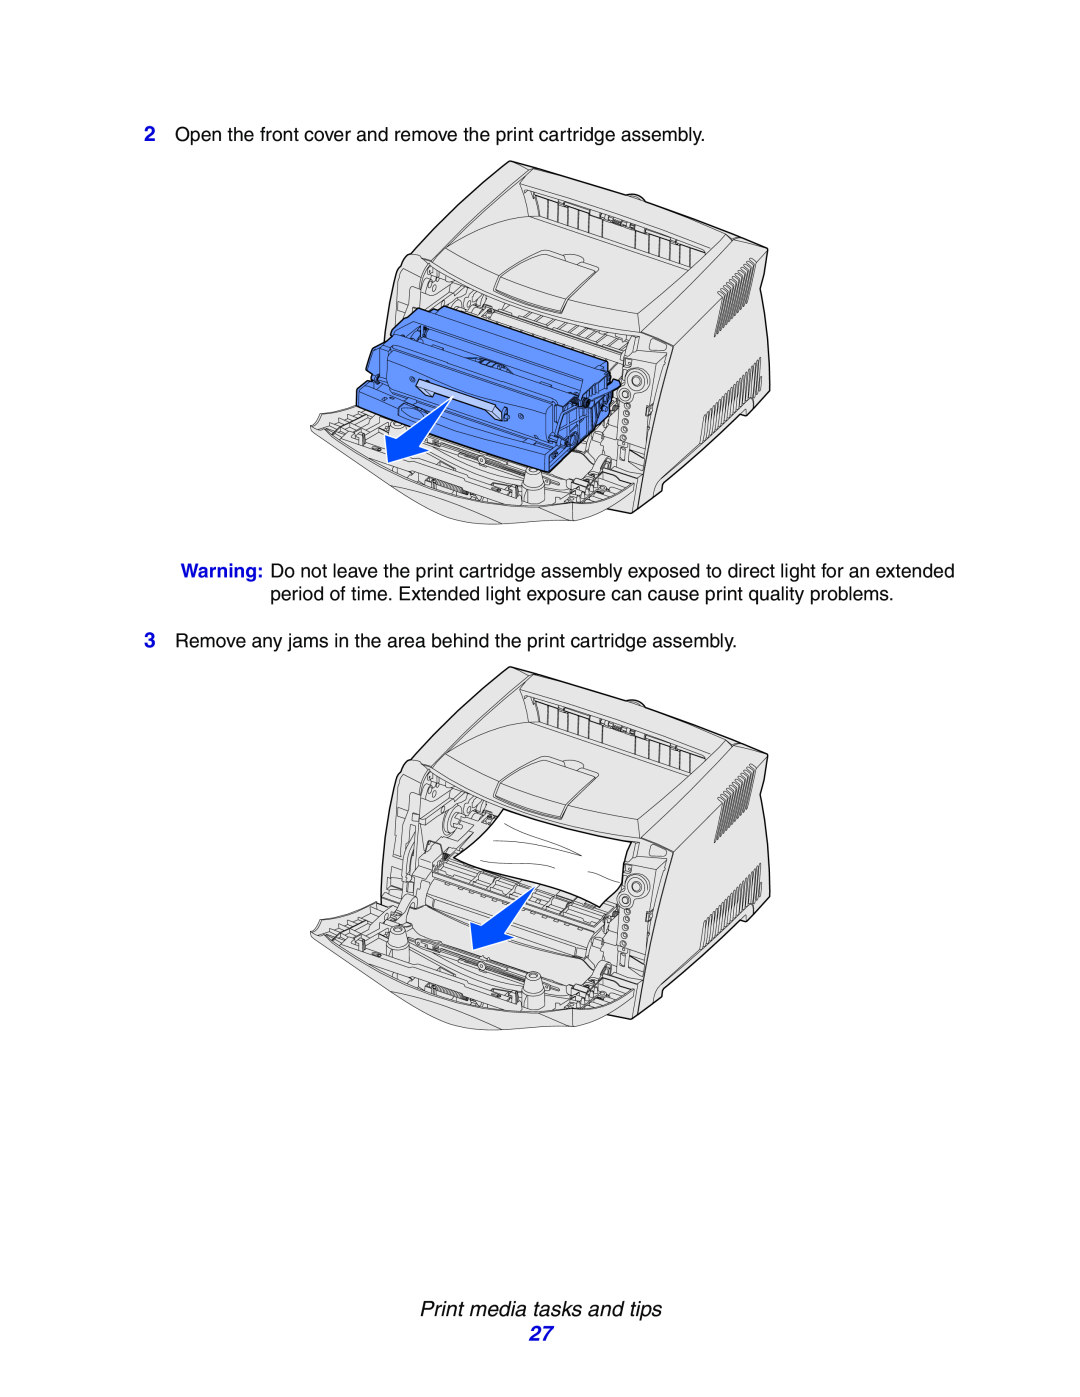 Lexmark E234N manual Print media tasks and tips, 2Open the front cover and remove the print cartridge assembly 